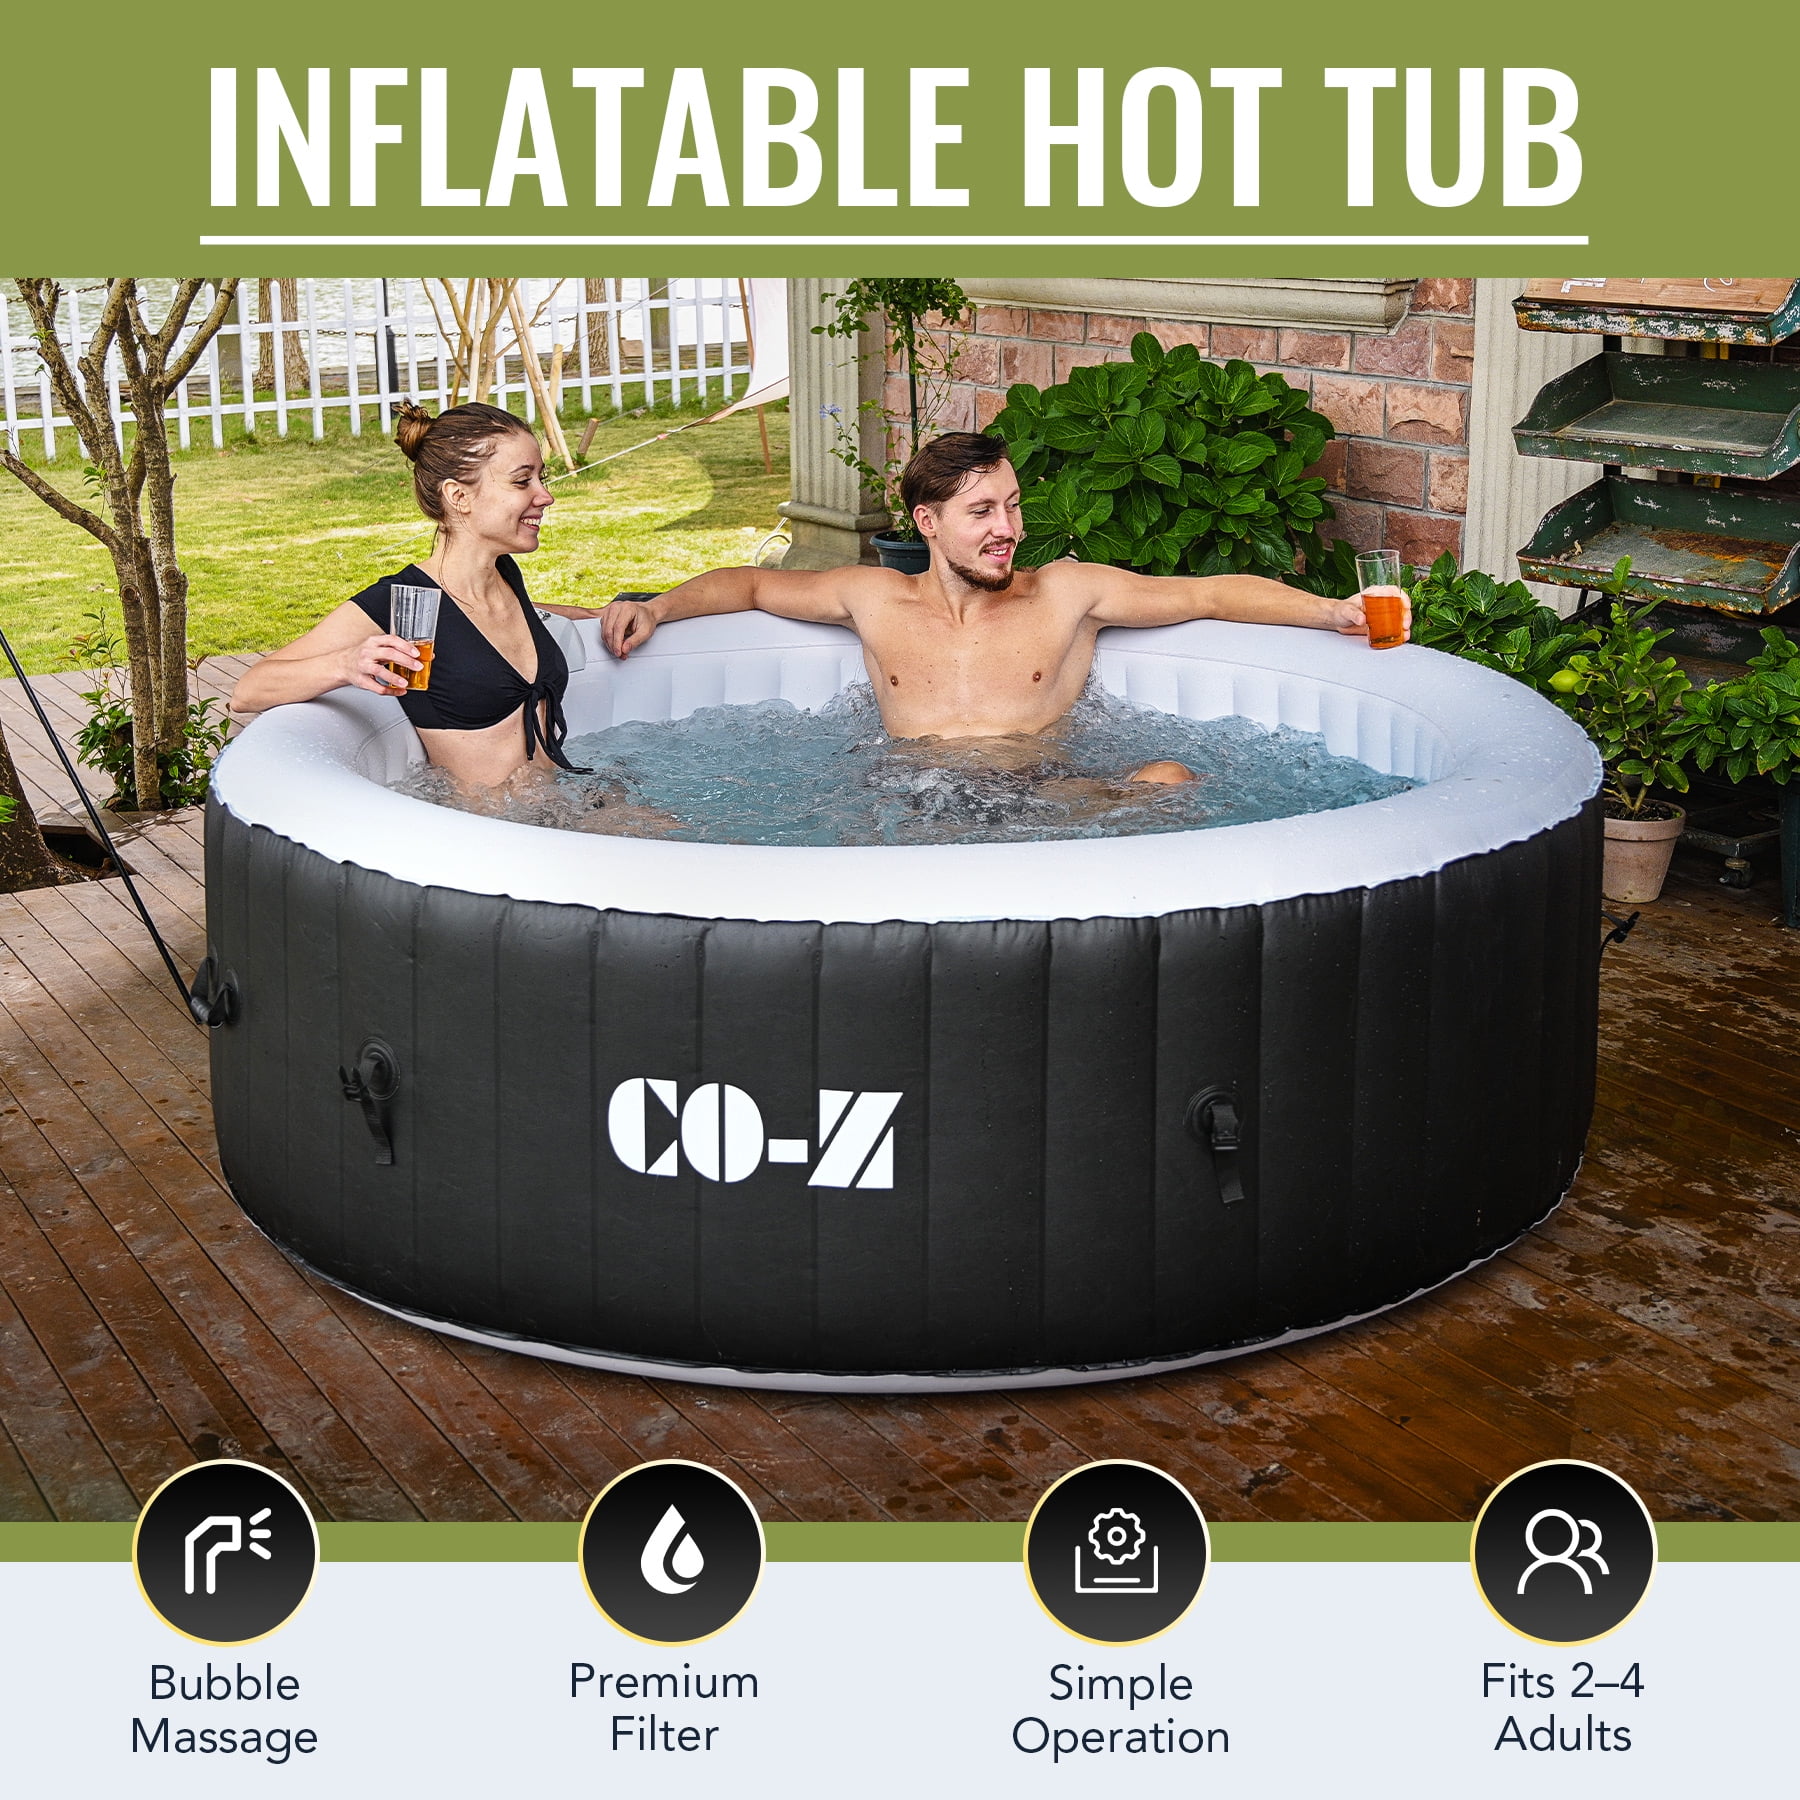 4 Person Blow Up Portable Hot Tub with 120 Bubble Jets Cover 5' Outdoor Above Ground Pool and Bathtub with Electric Air Pump for Patio Backyard CO-Z Inflatable Hot Tub Green 